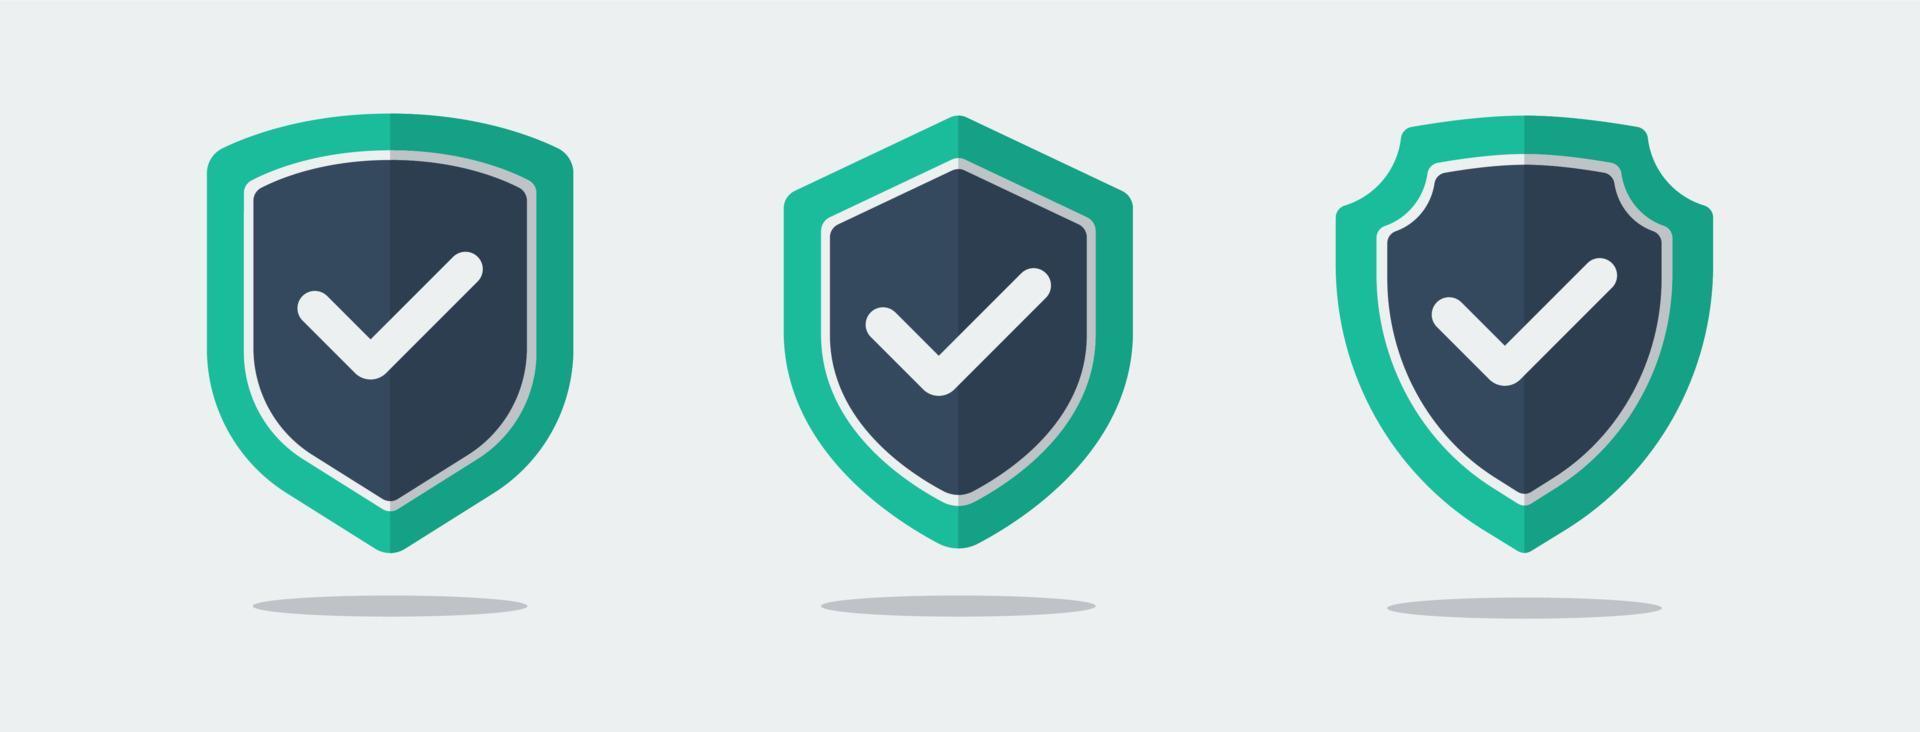 Shield icon. Protection, security, guard. Flat vector illustration suitable for many purposes.